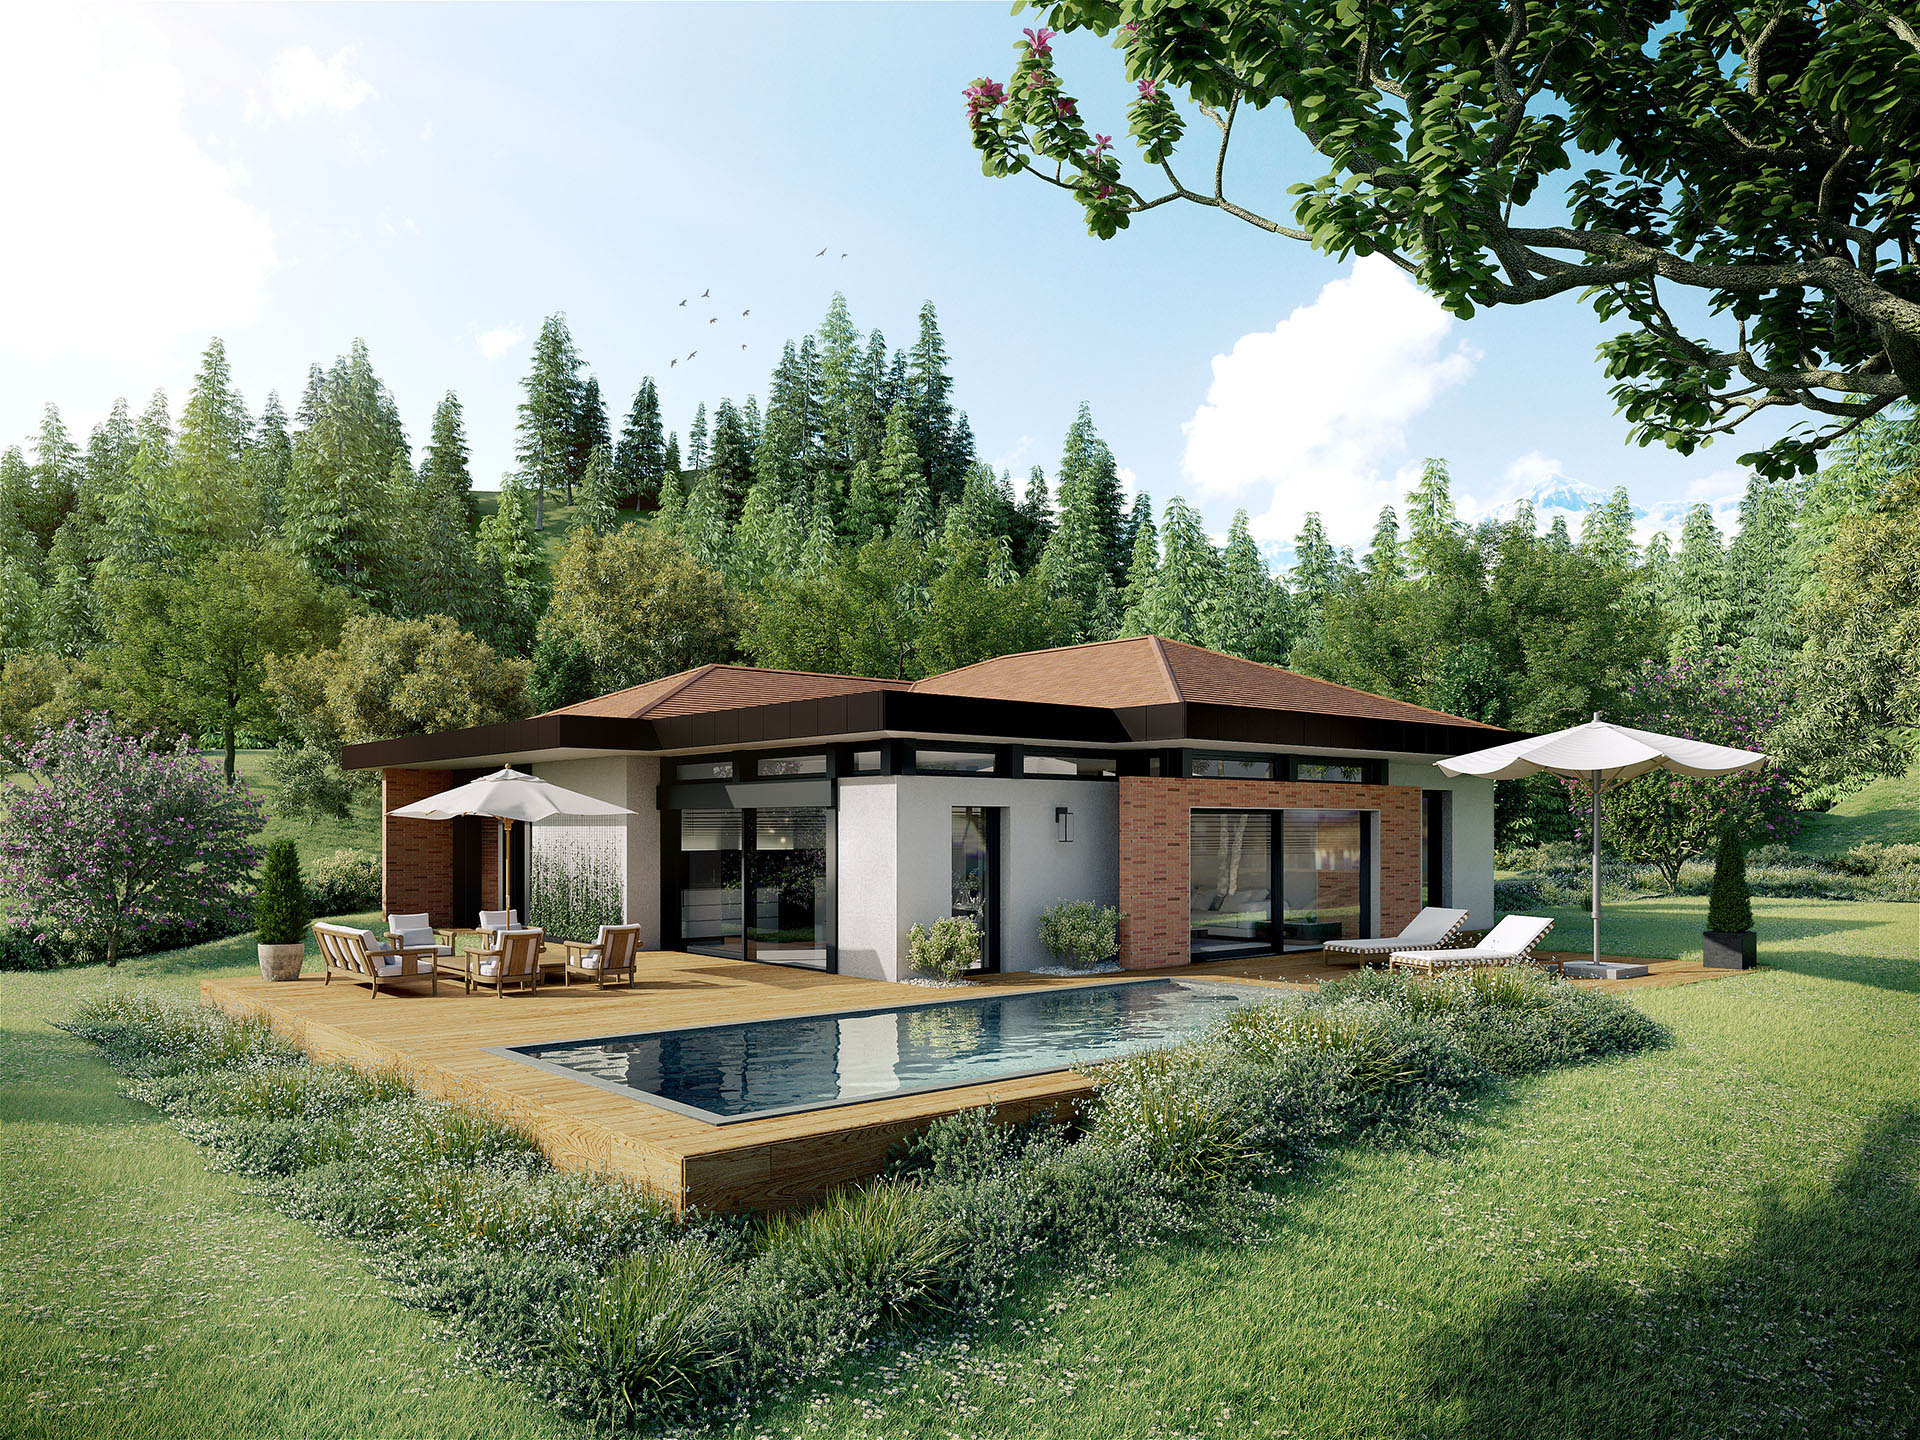 3D realization of a detached house in the country with swimming pool